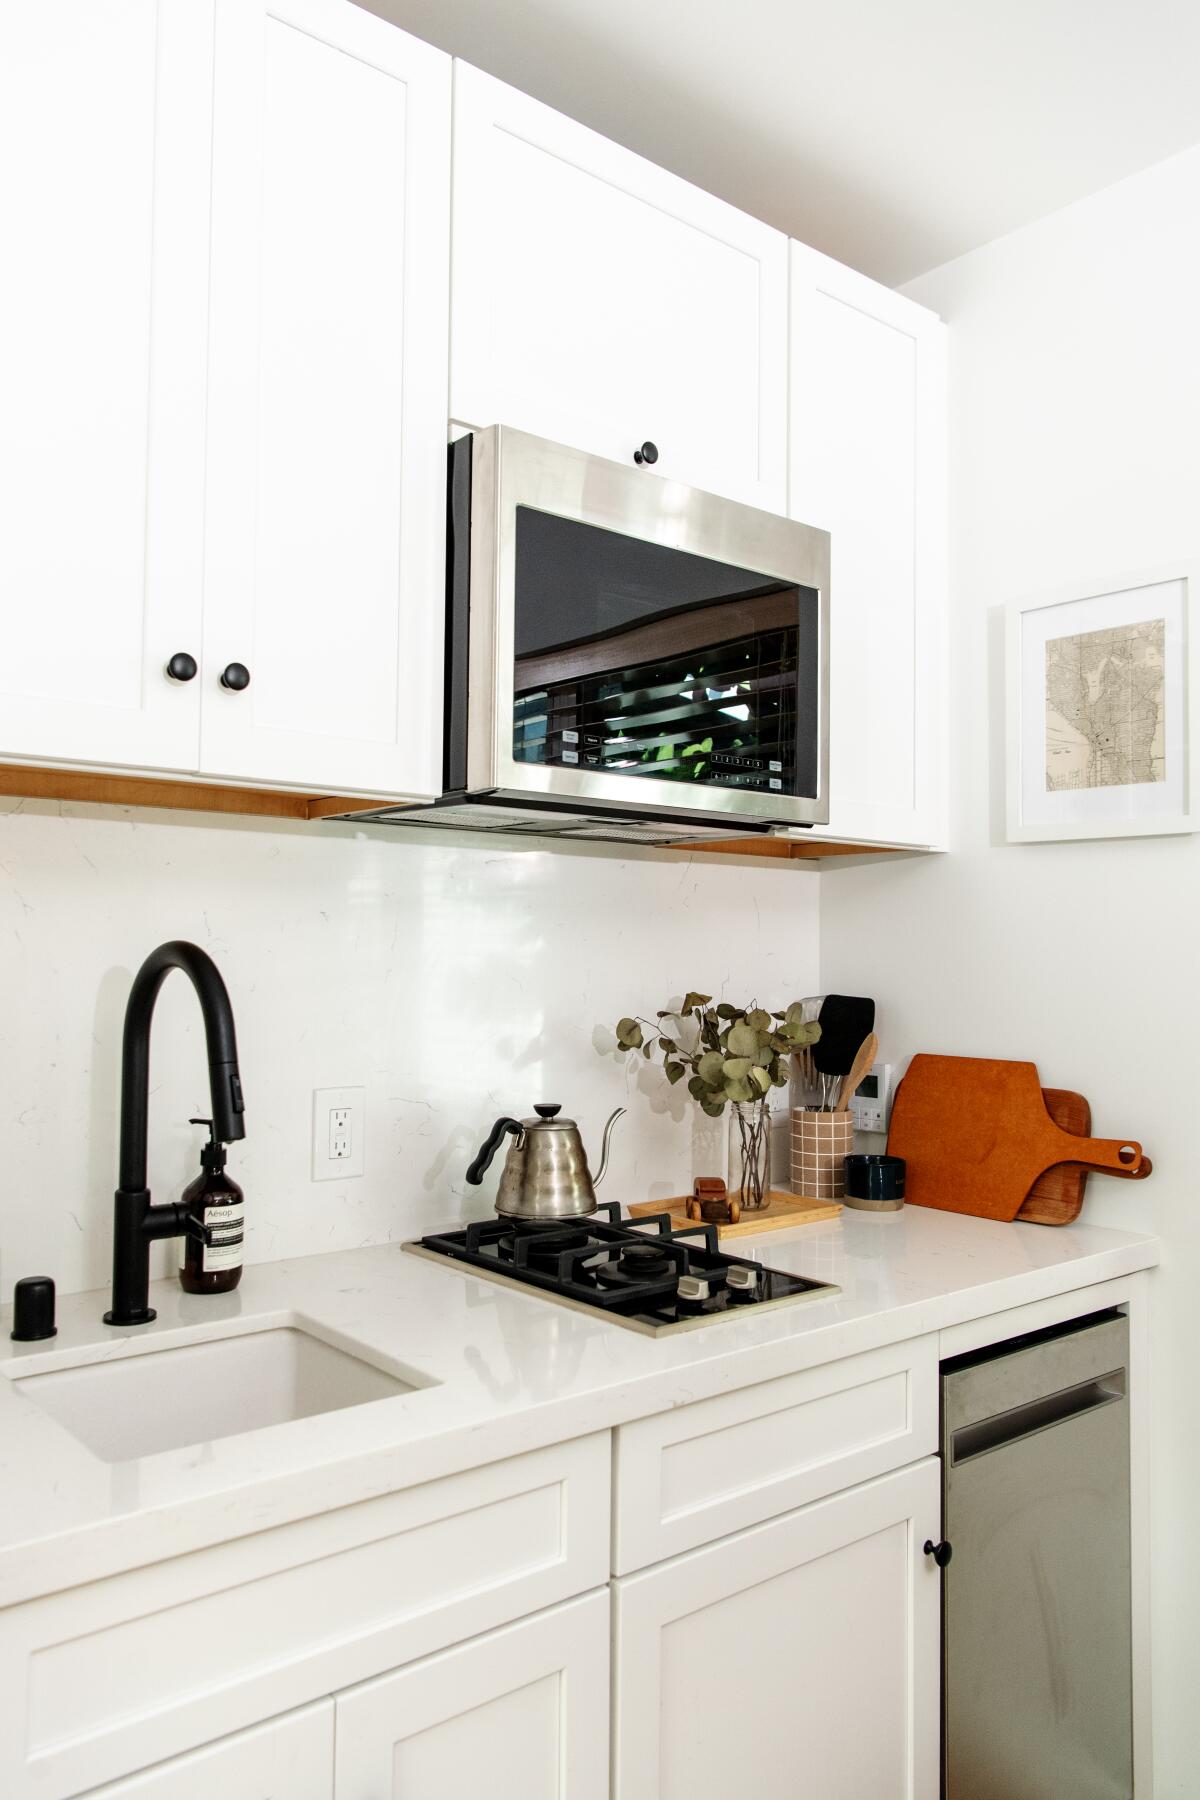 White cabinets fill this tiny kitchen with a silver microwave and dishwasher. 